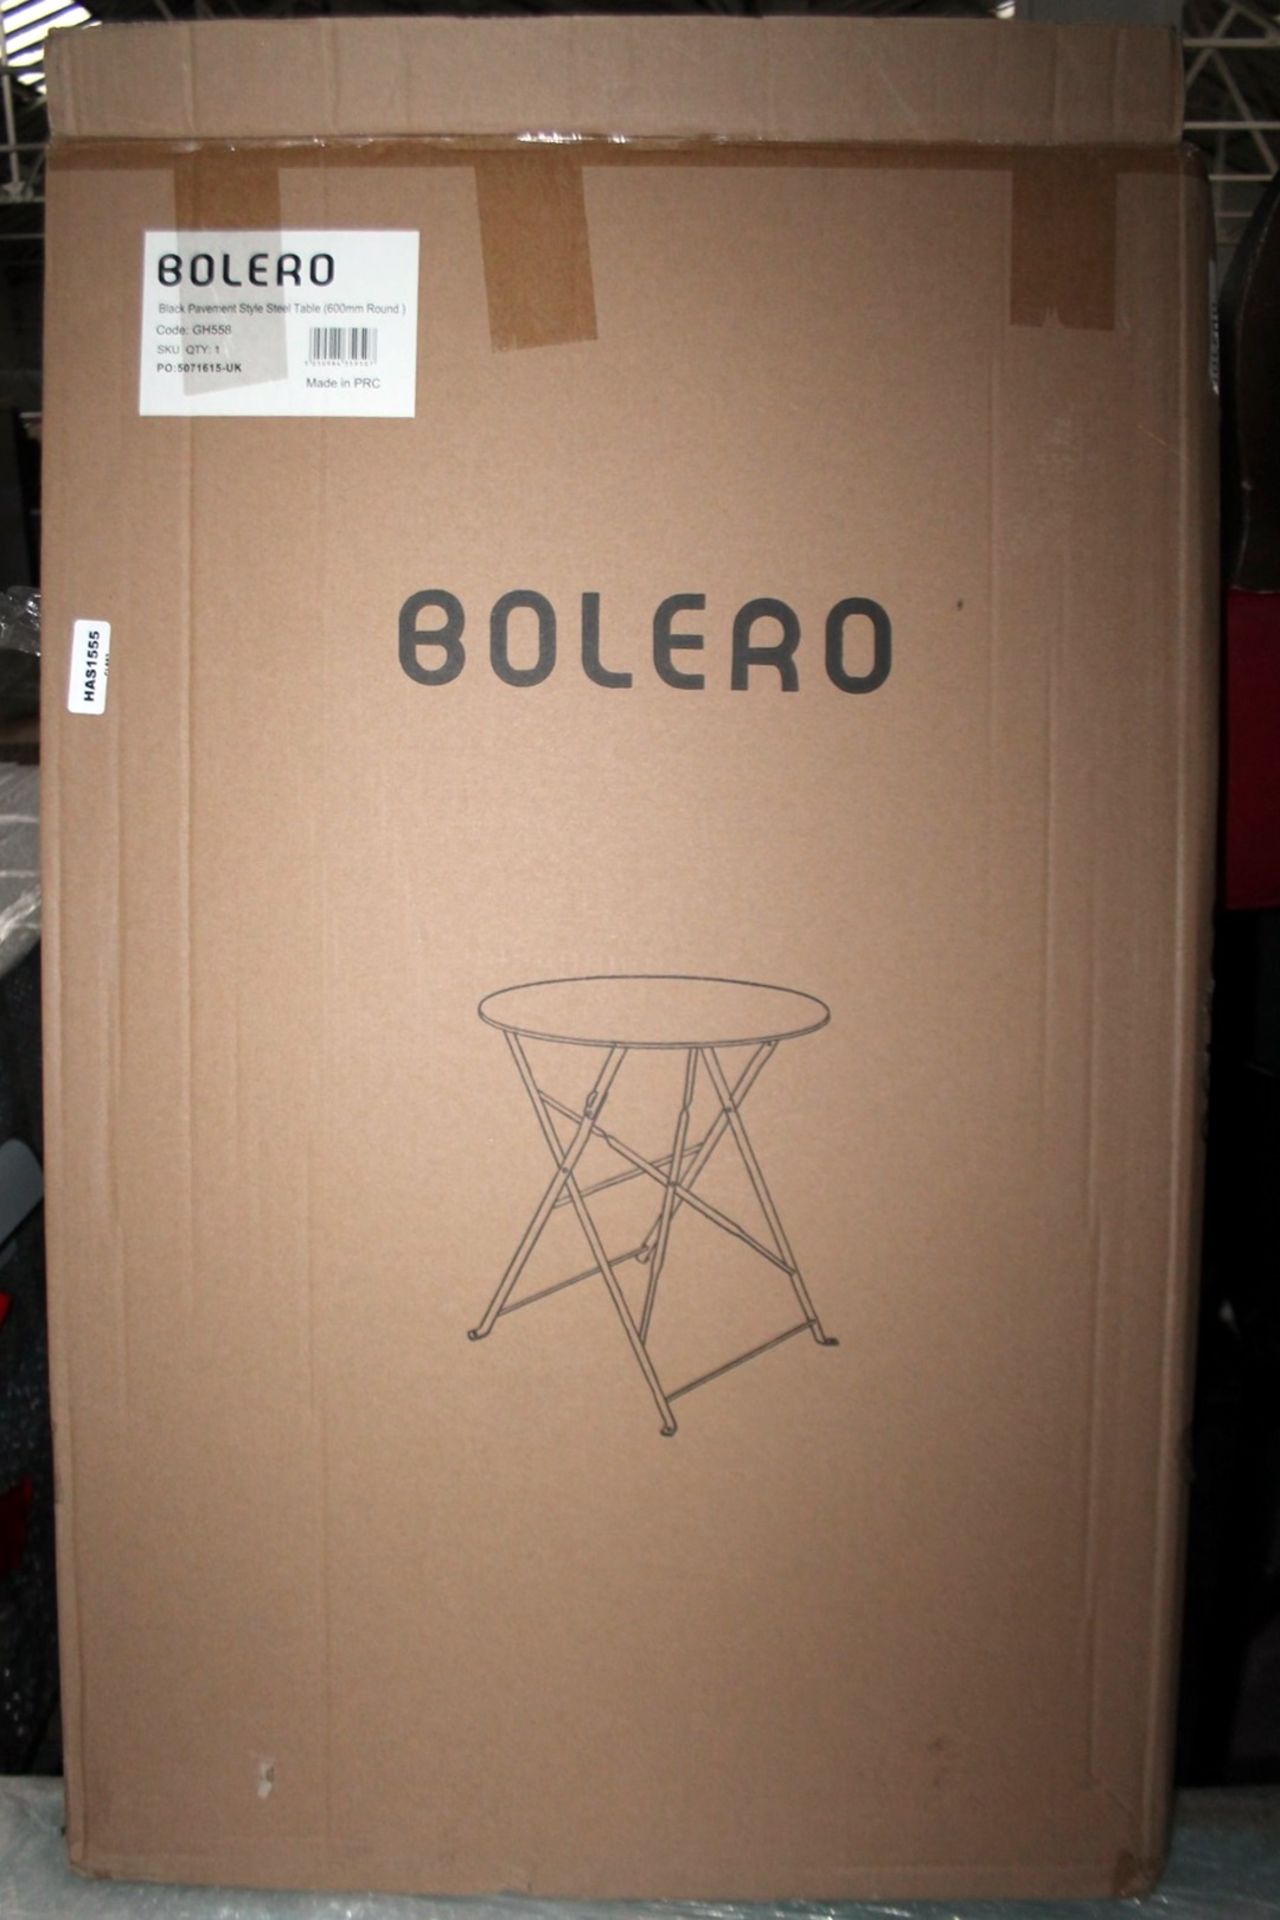 5 x BOLERO Folding Outdoor Pavement Style Steel Tables - Preowned - Total Original RRP £280.00 - Image 3 of 5